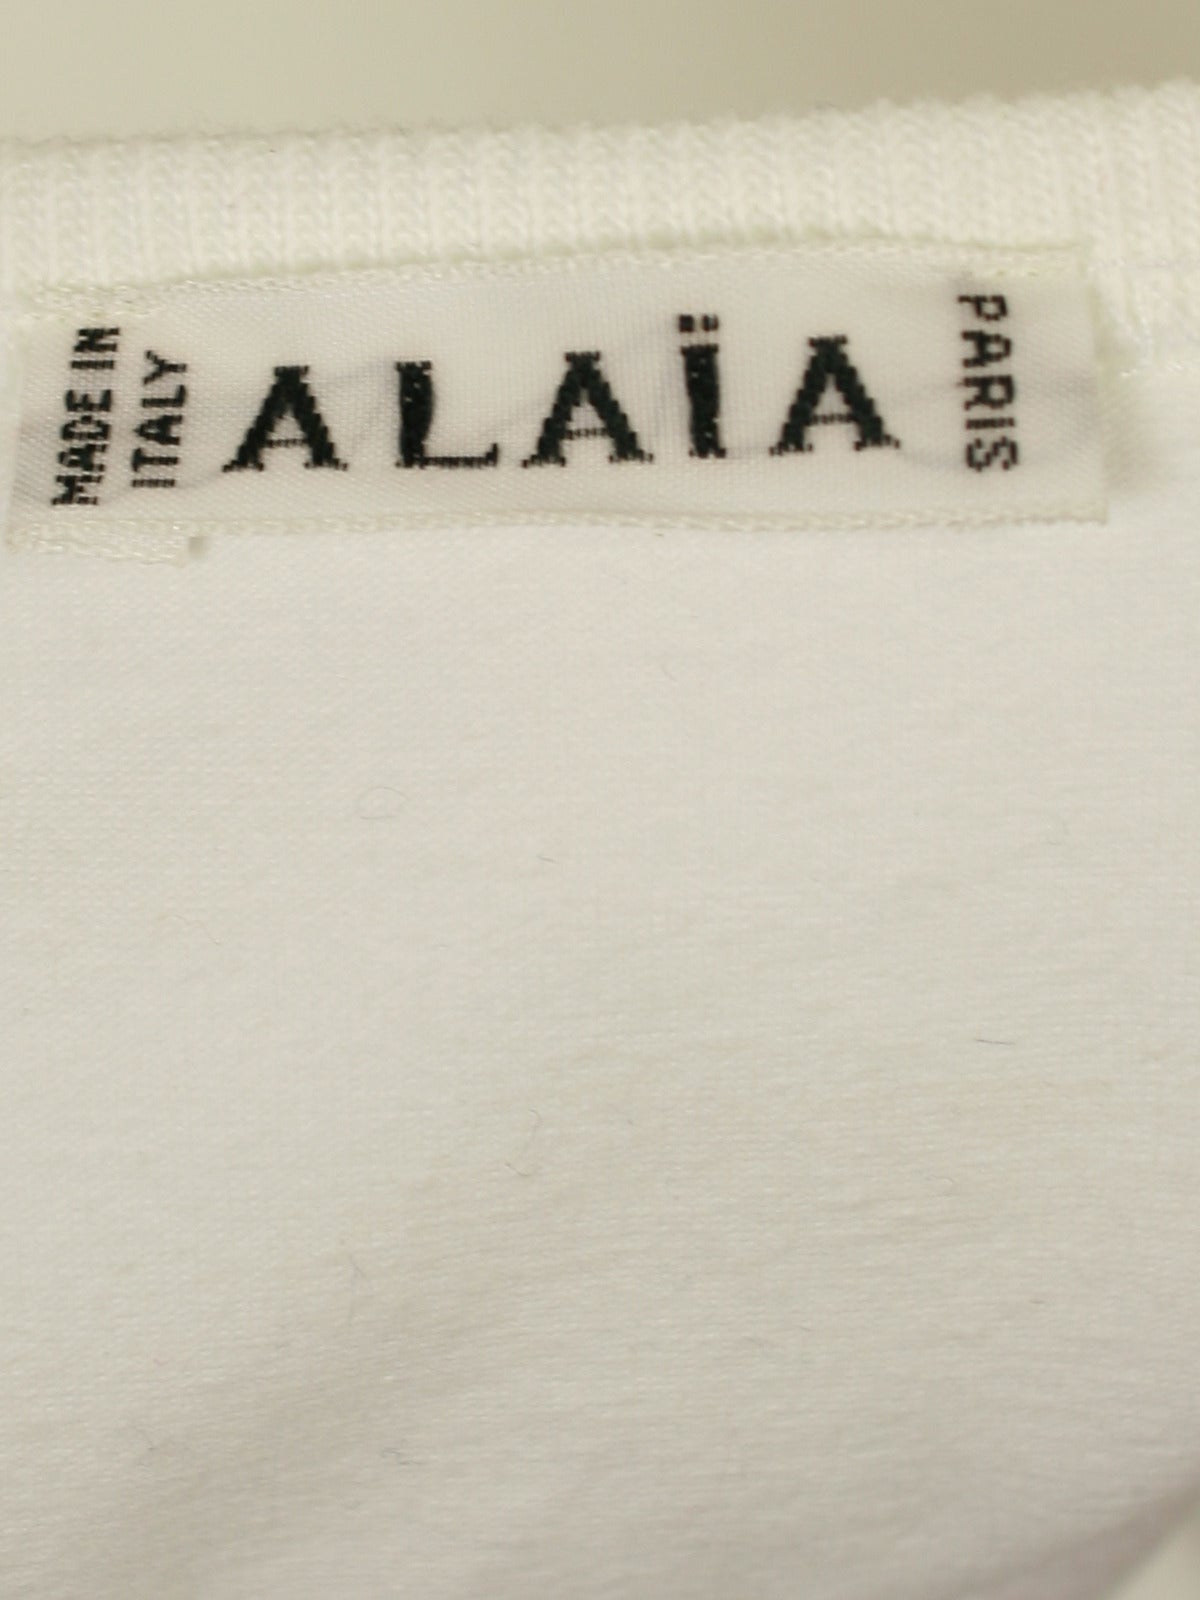 Alaia Rare Cropped Tee Shirt In Excellent Condition For Sale In New York, NY